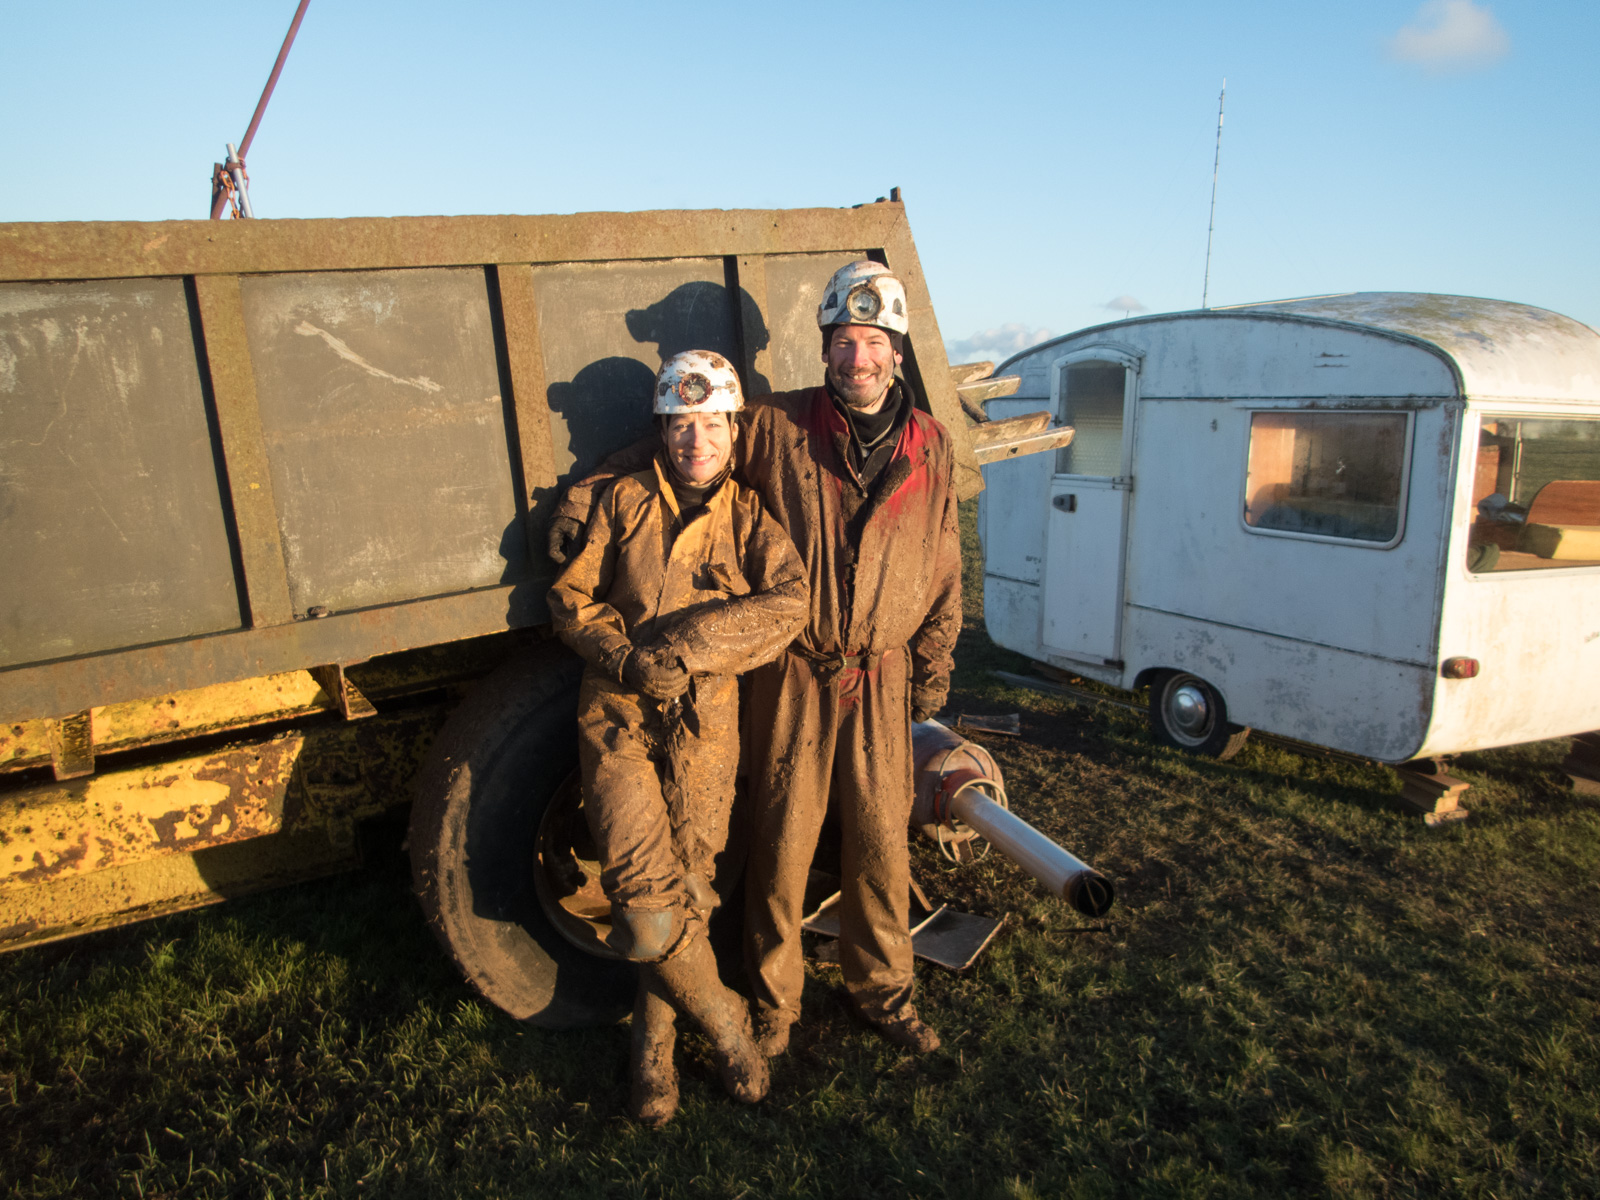 Sarah Payne and Duncan Simey after emerging from their exploratory trip. Photo by Tim Payne.